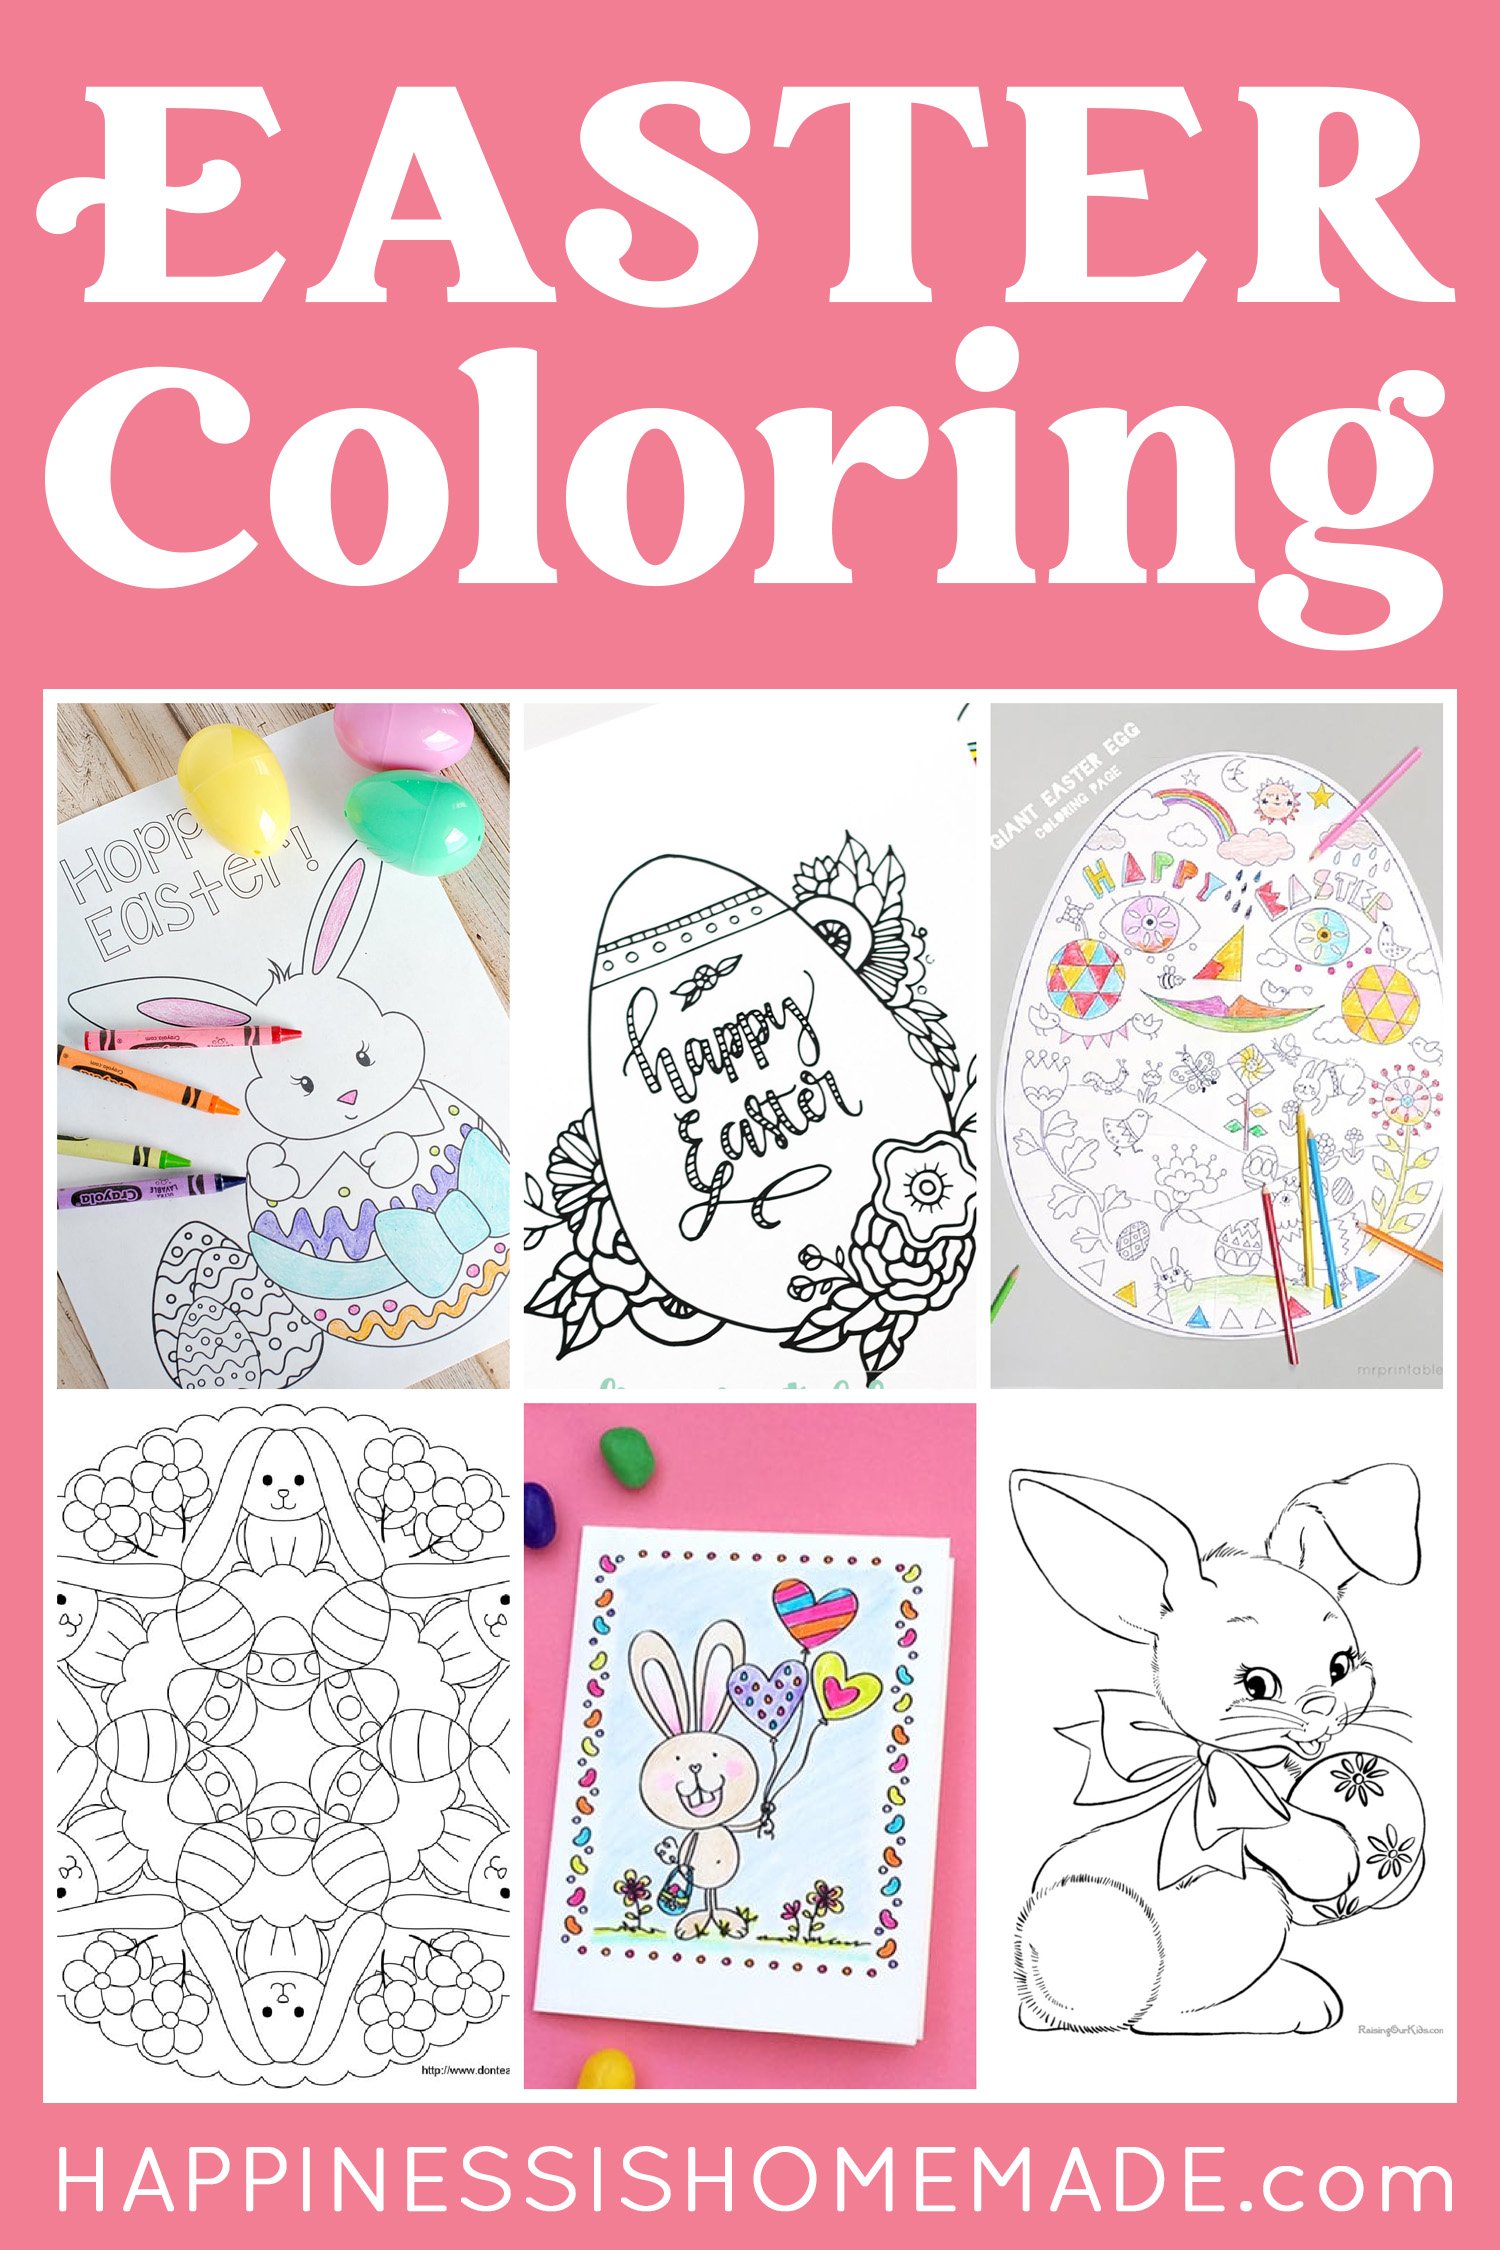 "Easter Coloring Pages" graphic with collage of printable coloring sheets